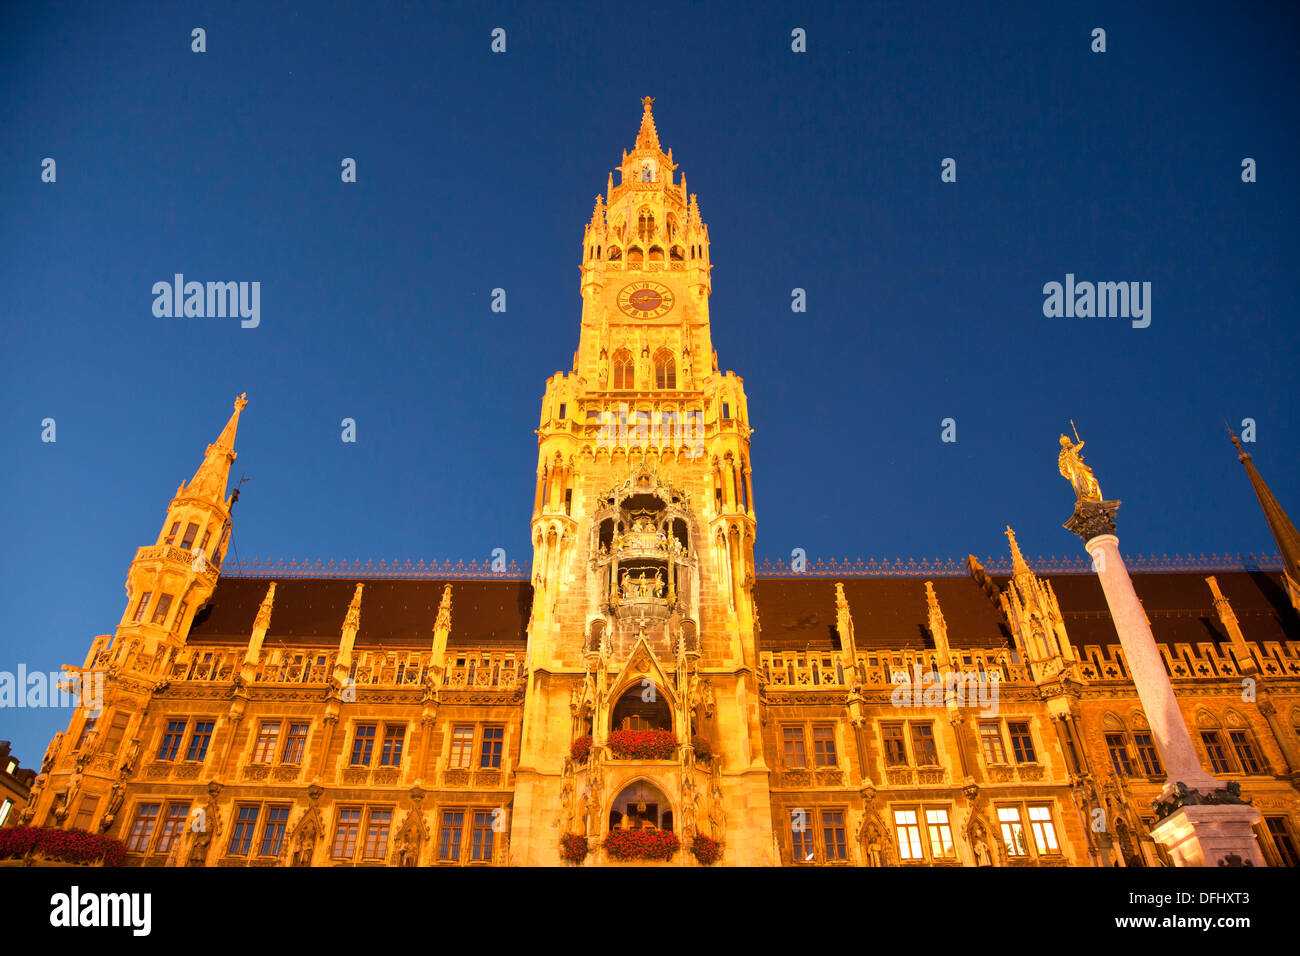 the new townhall Neues Rathaus on the central square Marienplatz in Munich, Bavaria, Germany Stock Photo